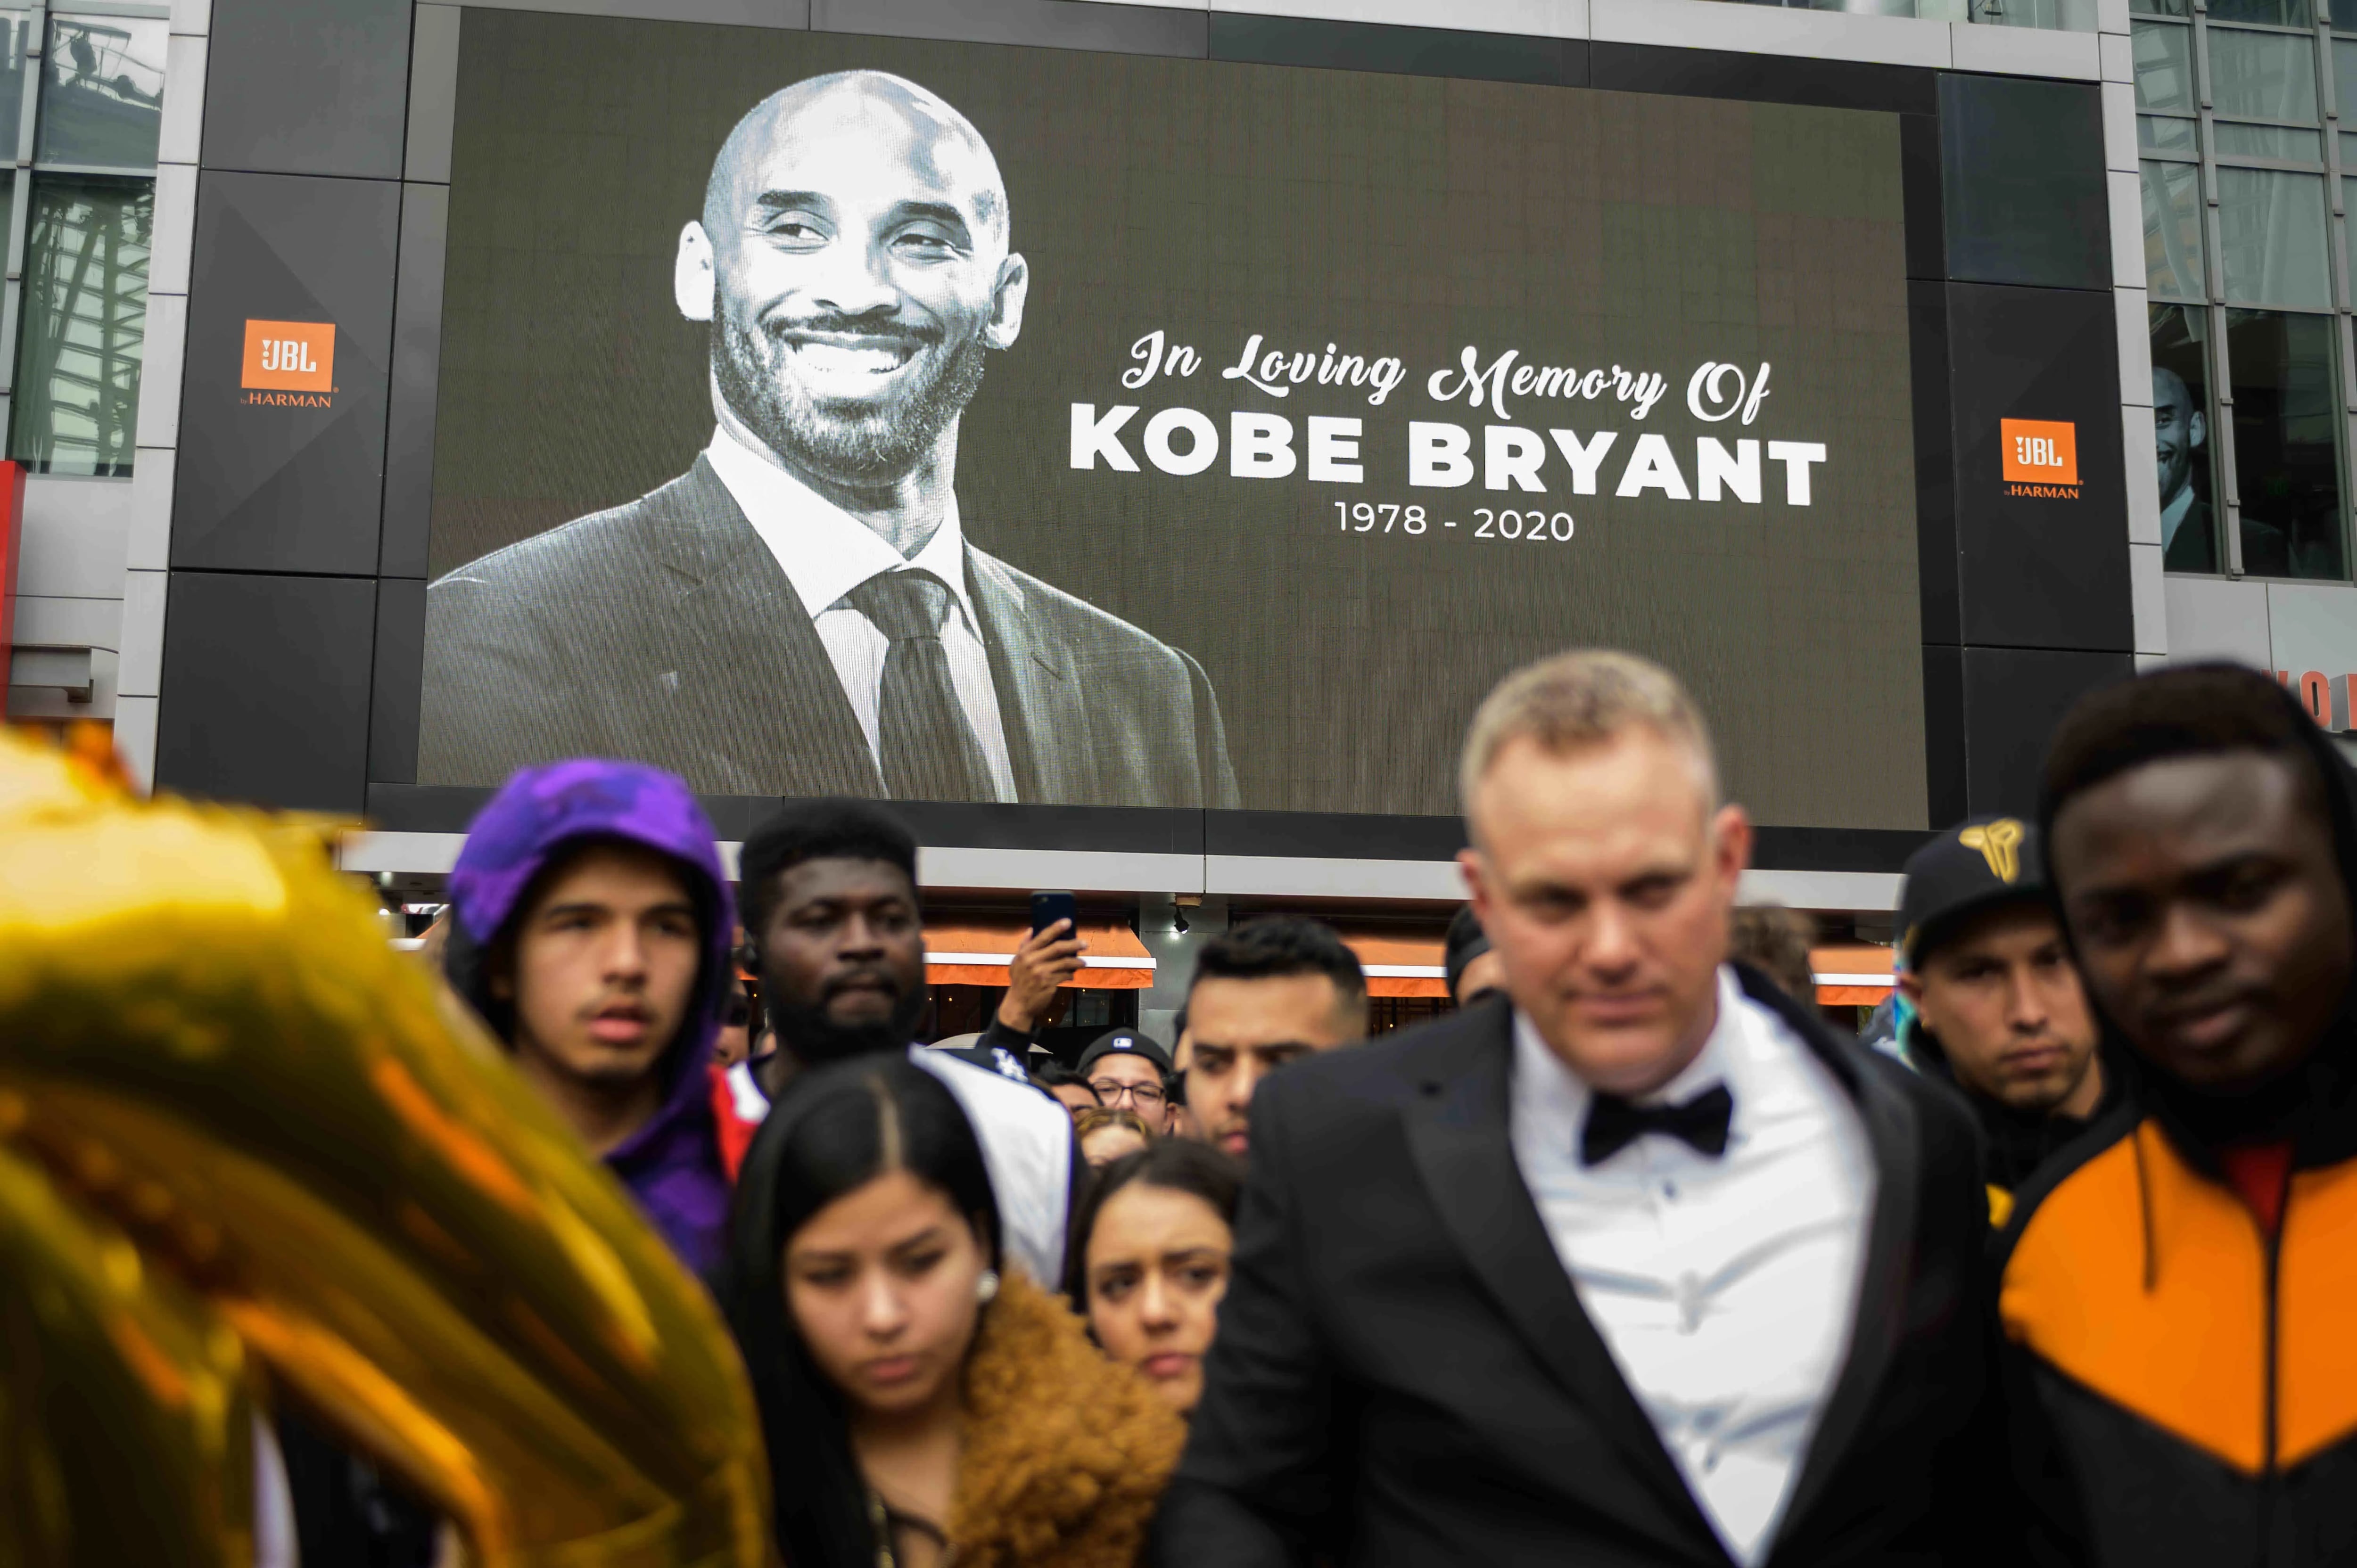 Kobe Bryant, daughter Gianna, among 9 killed in helicopter crash